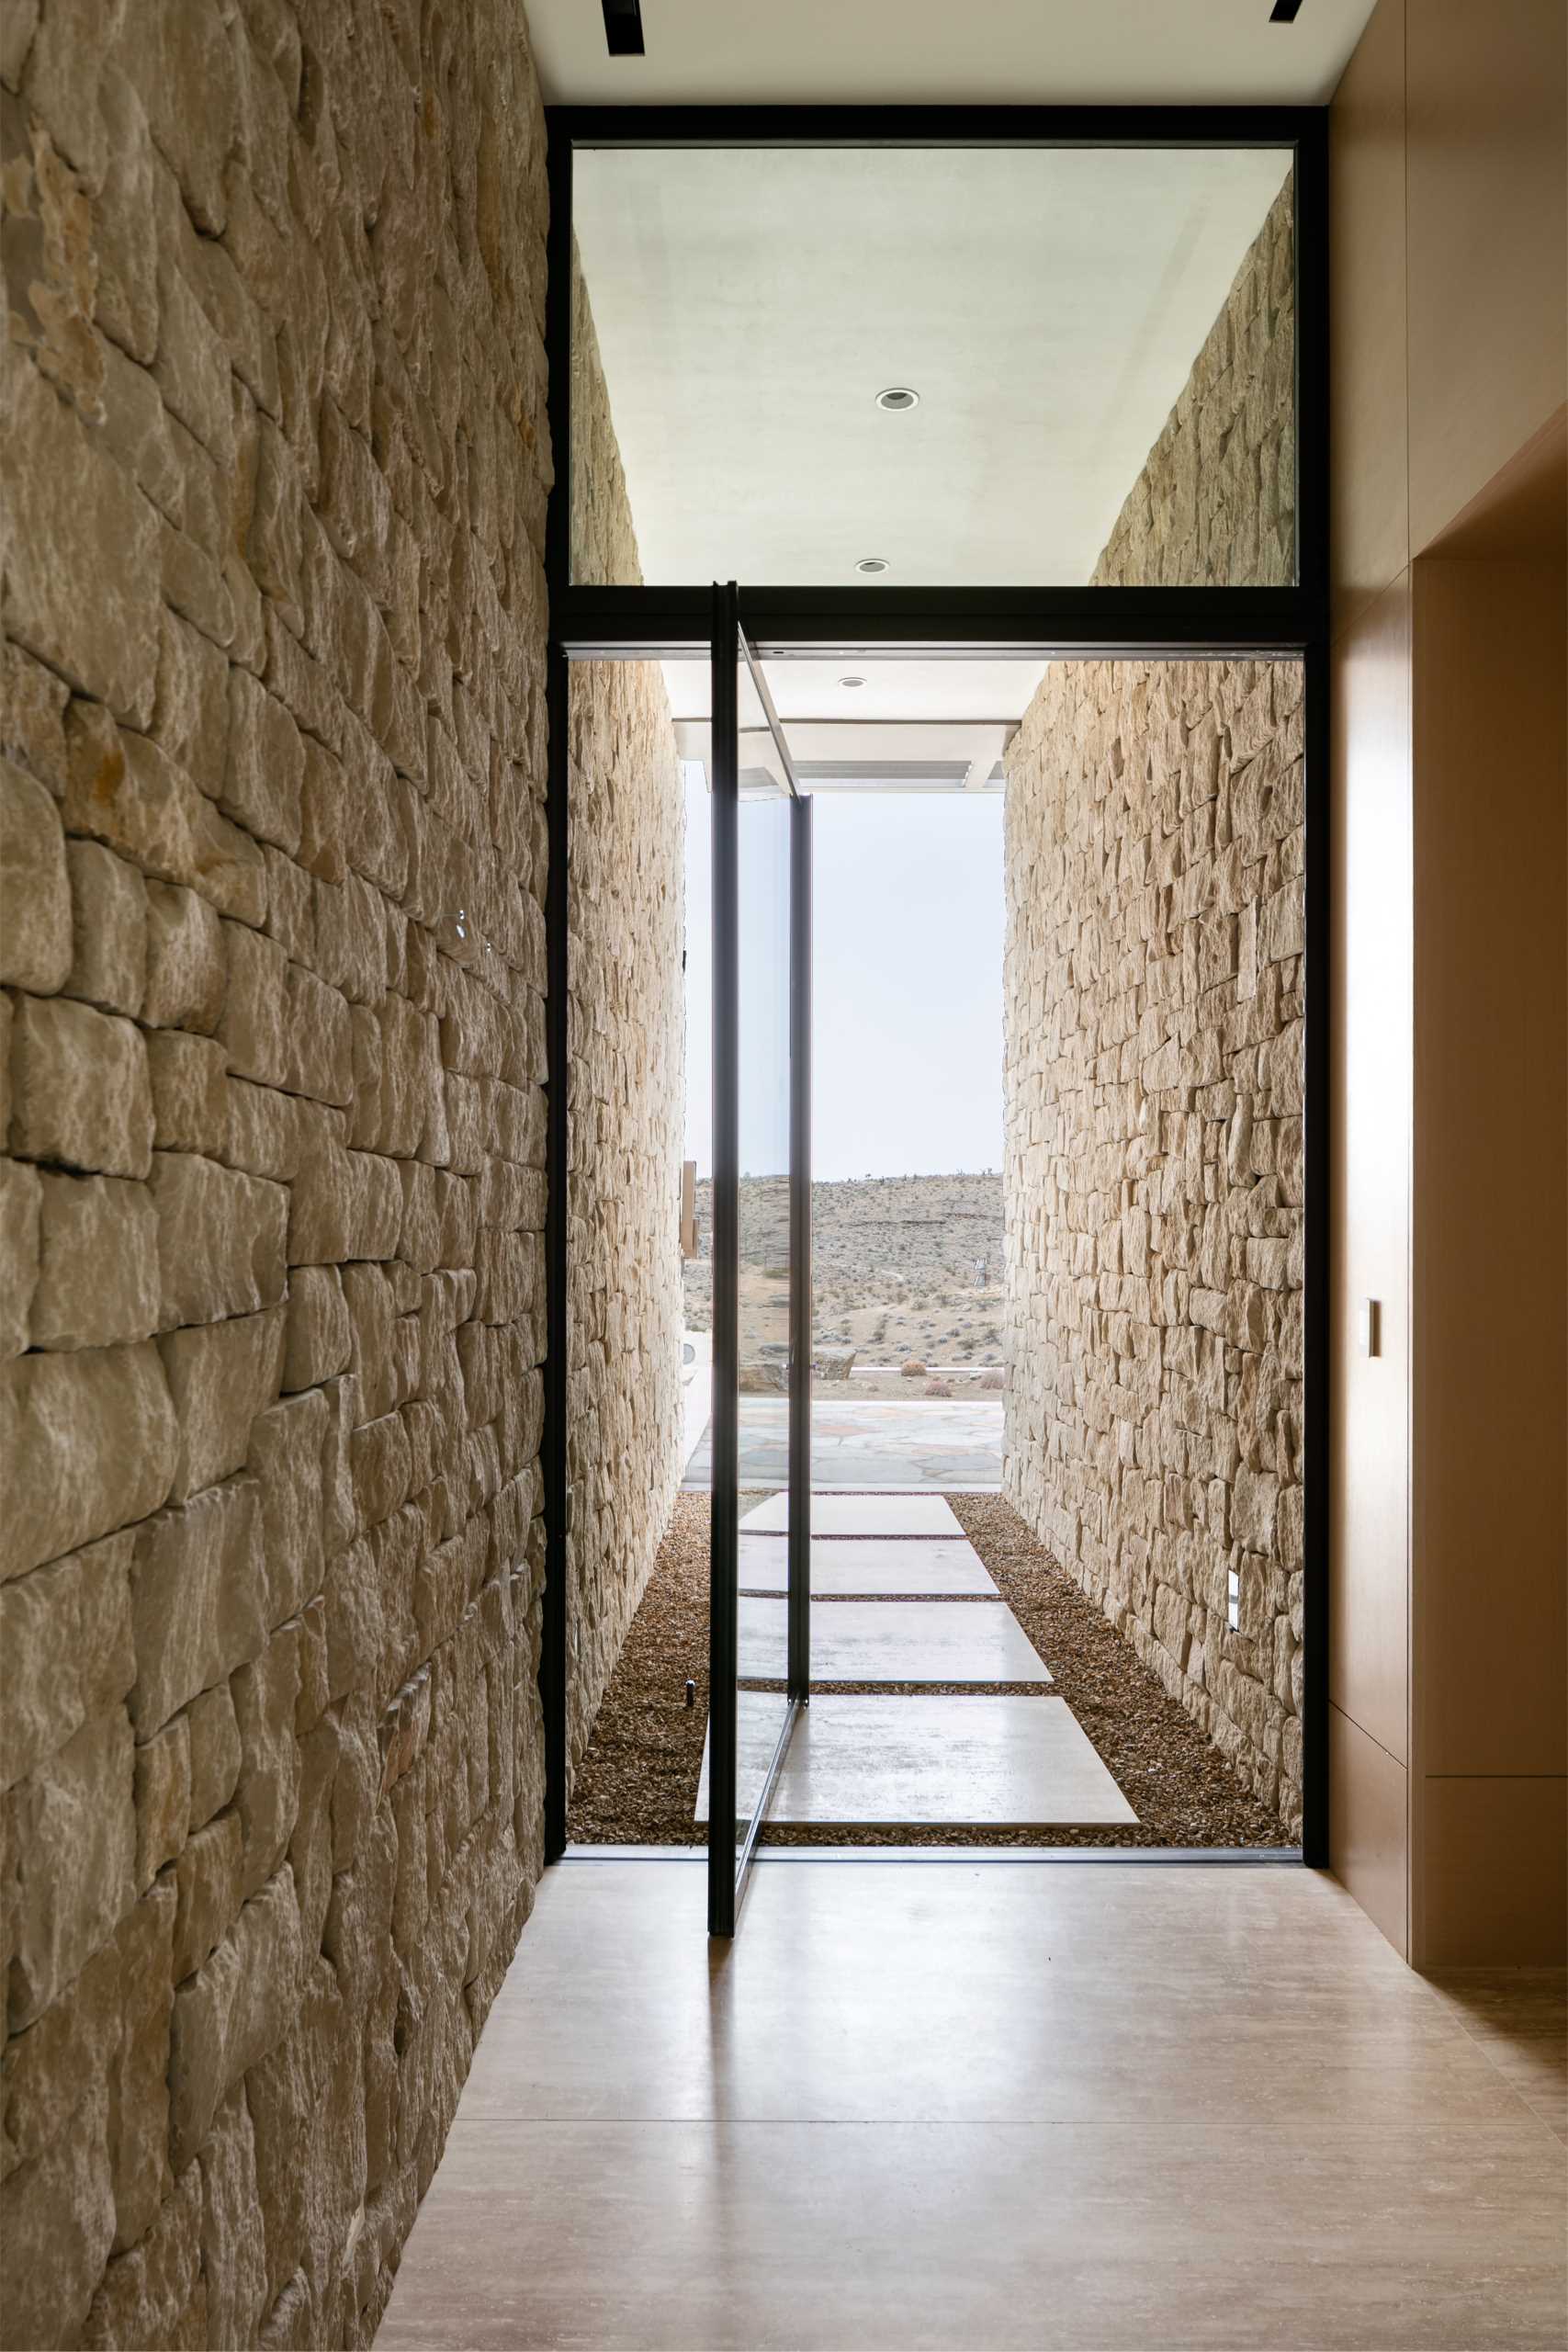 A pivoting glass front door with a black frame welcomes visitors to the home.